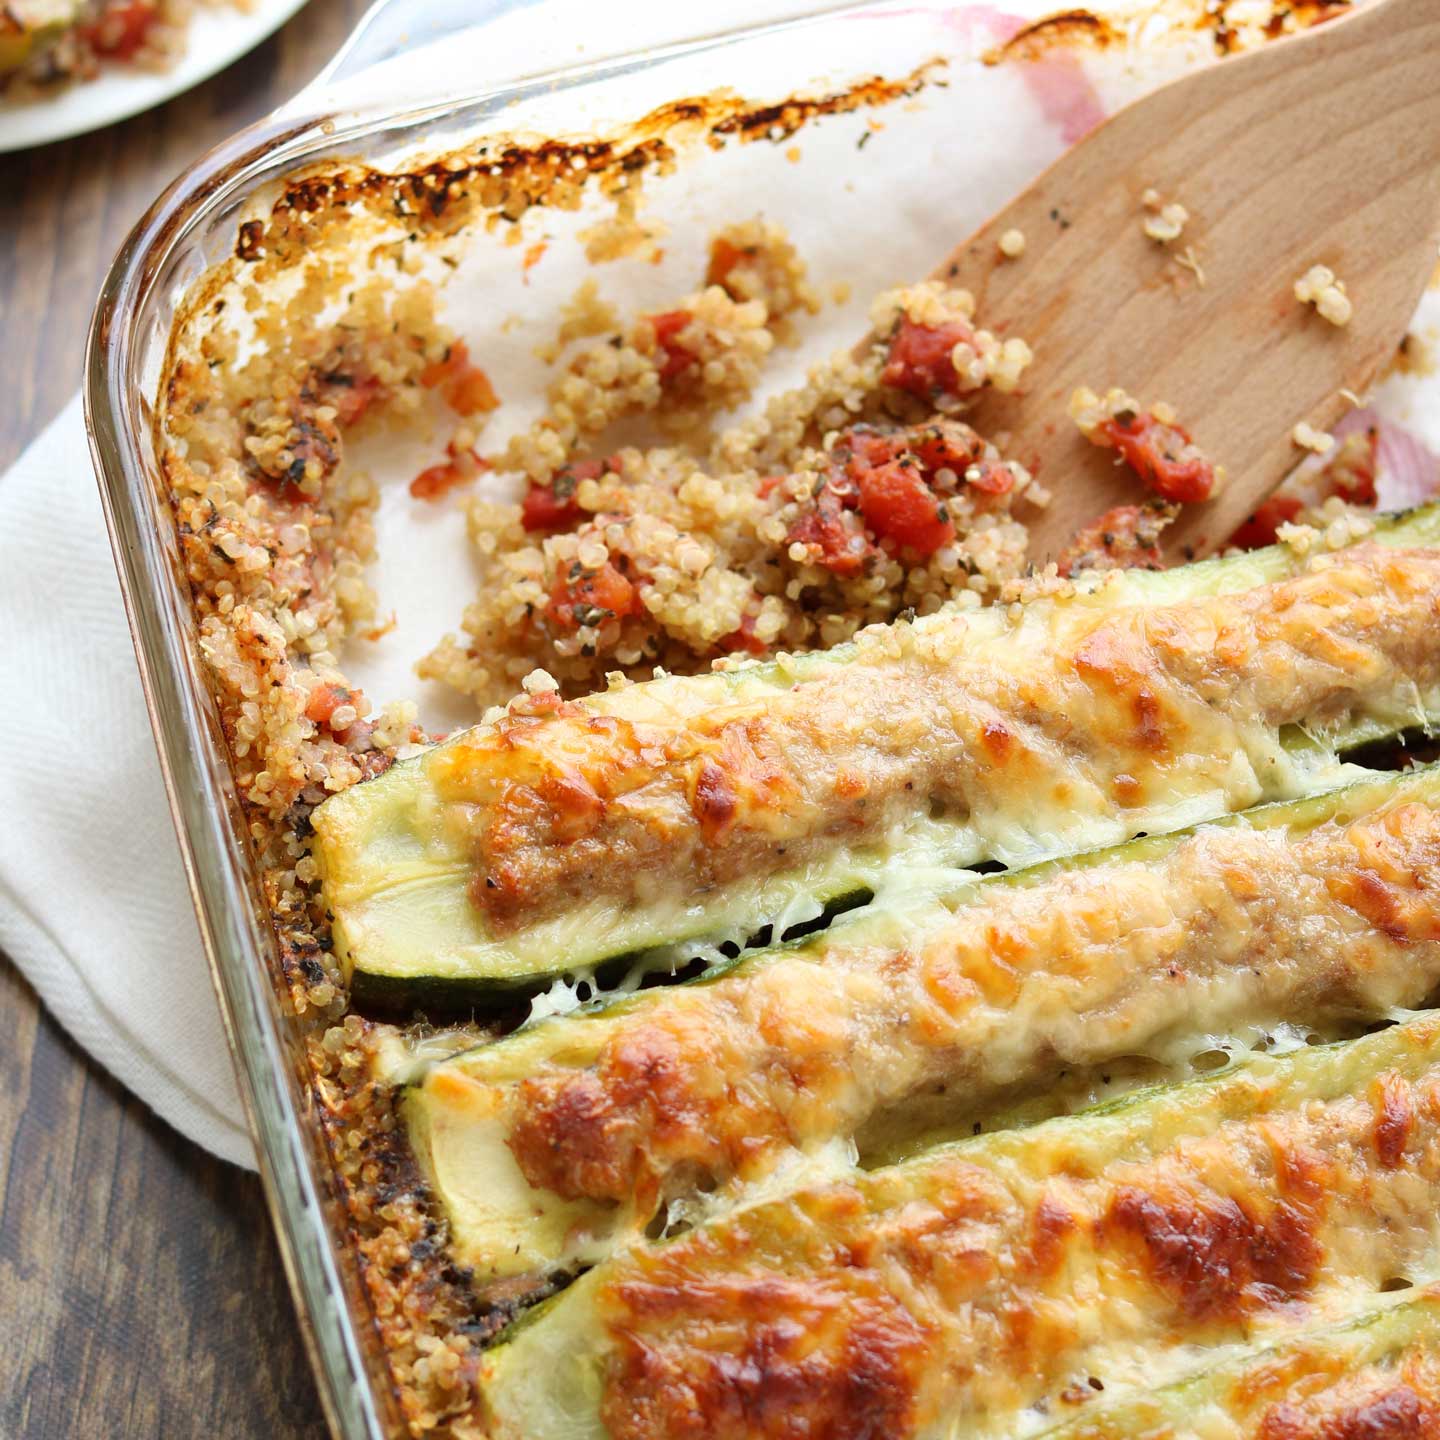 Stuffed zucchini boats are filled with Italian sausage and sprinkled with cheese in this easy zucchini casserole. The base of quinoa and tomatoes truly makes it a one-dish meal – you don’t even need to add a side dish!